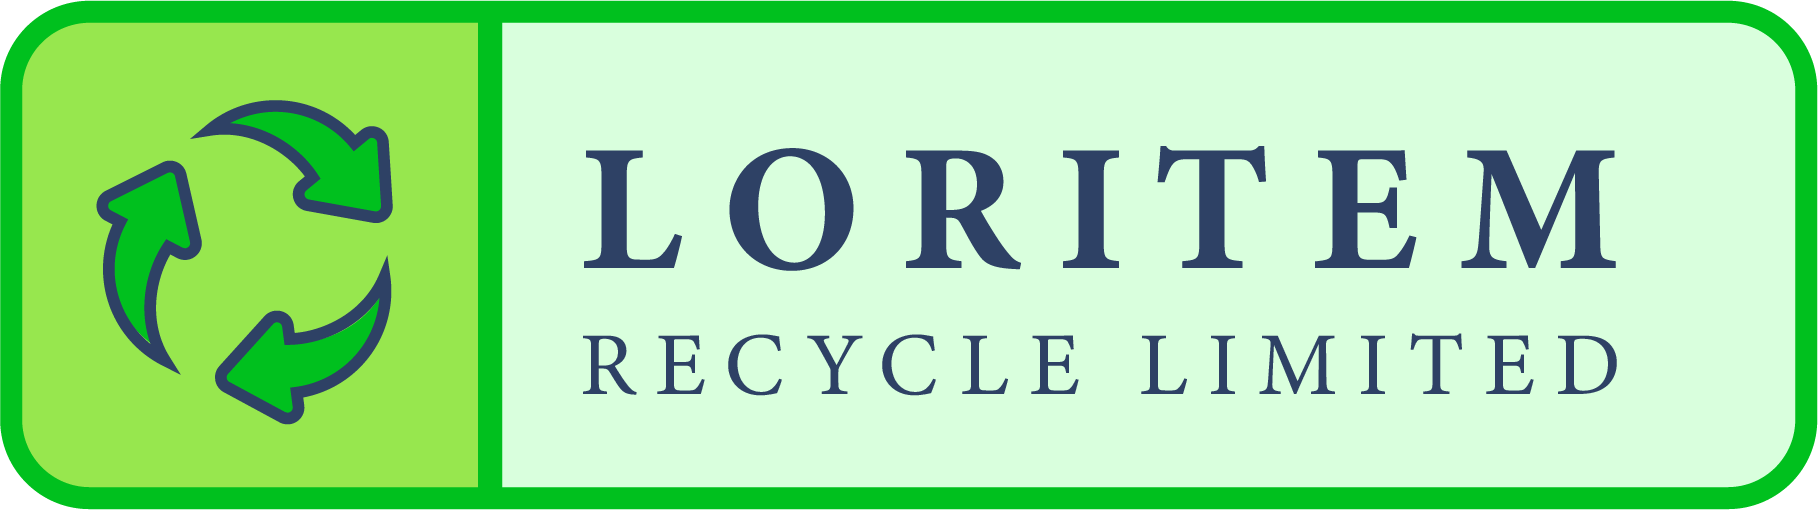 Loritem Recycle Limited